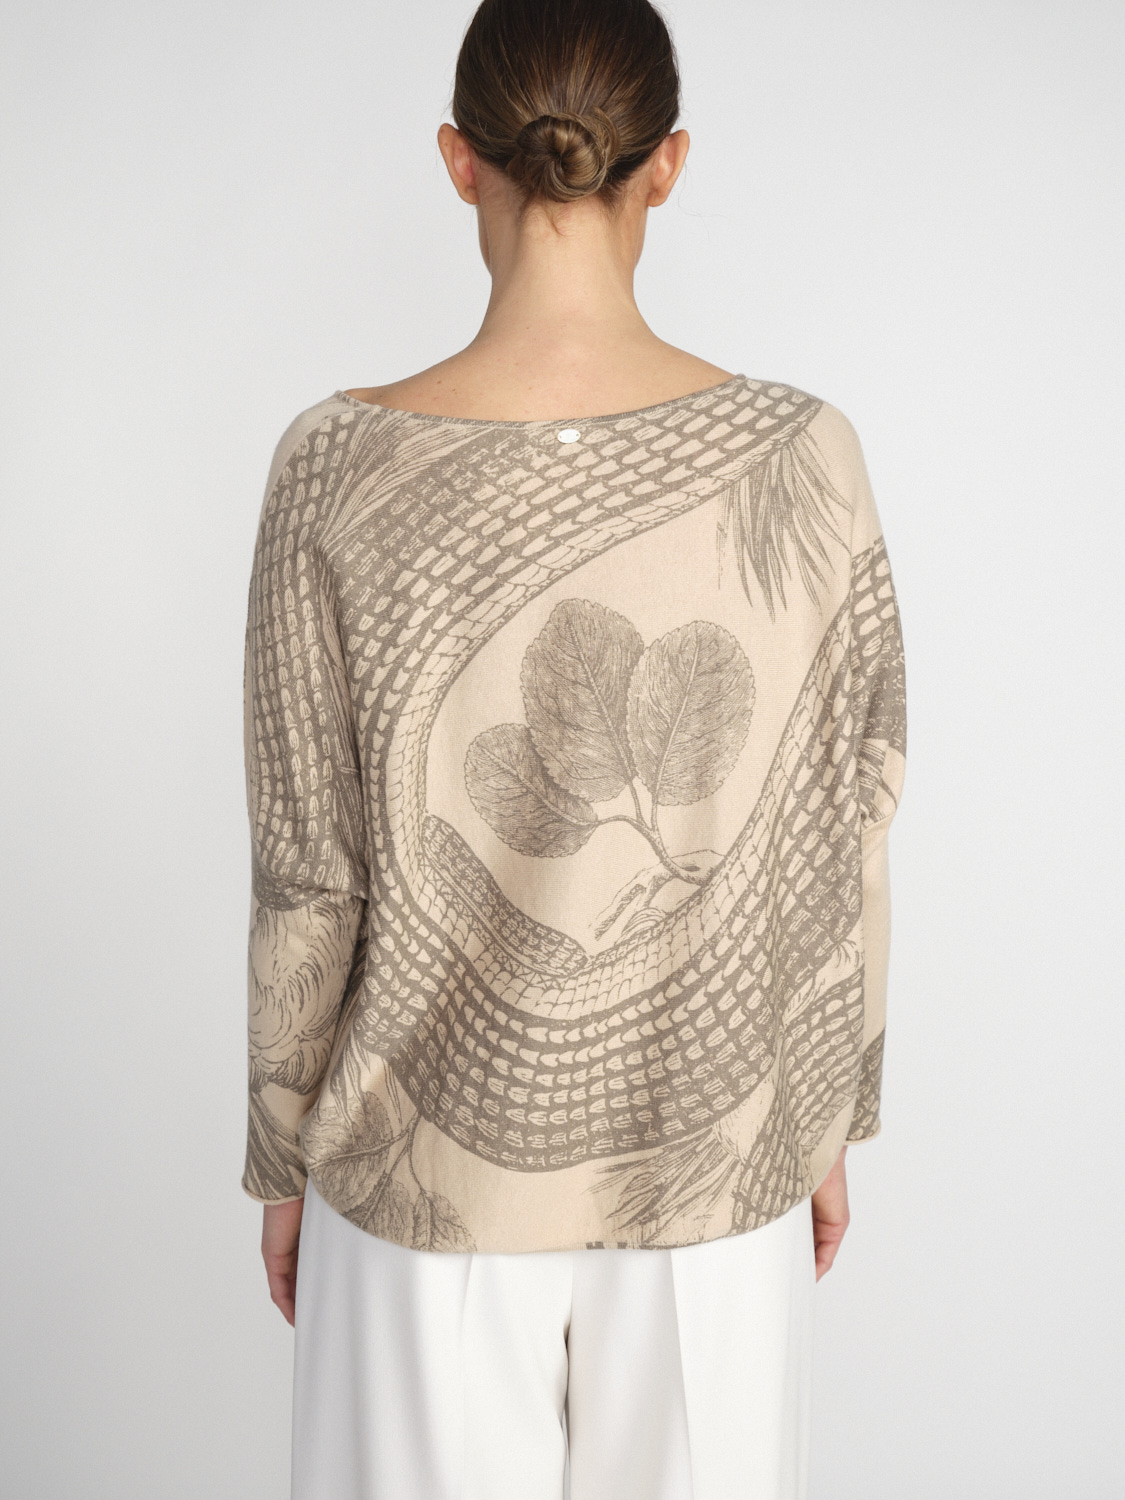 friendly hunting Imara Brighton - Lightweight sweater made from a cotton-cashmere blend  beige XS